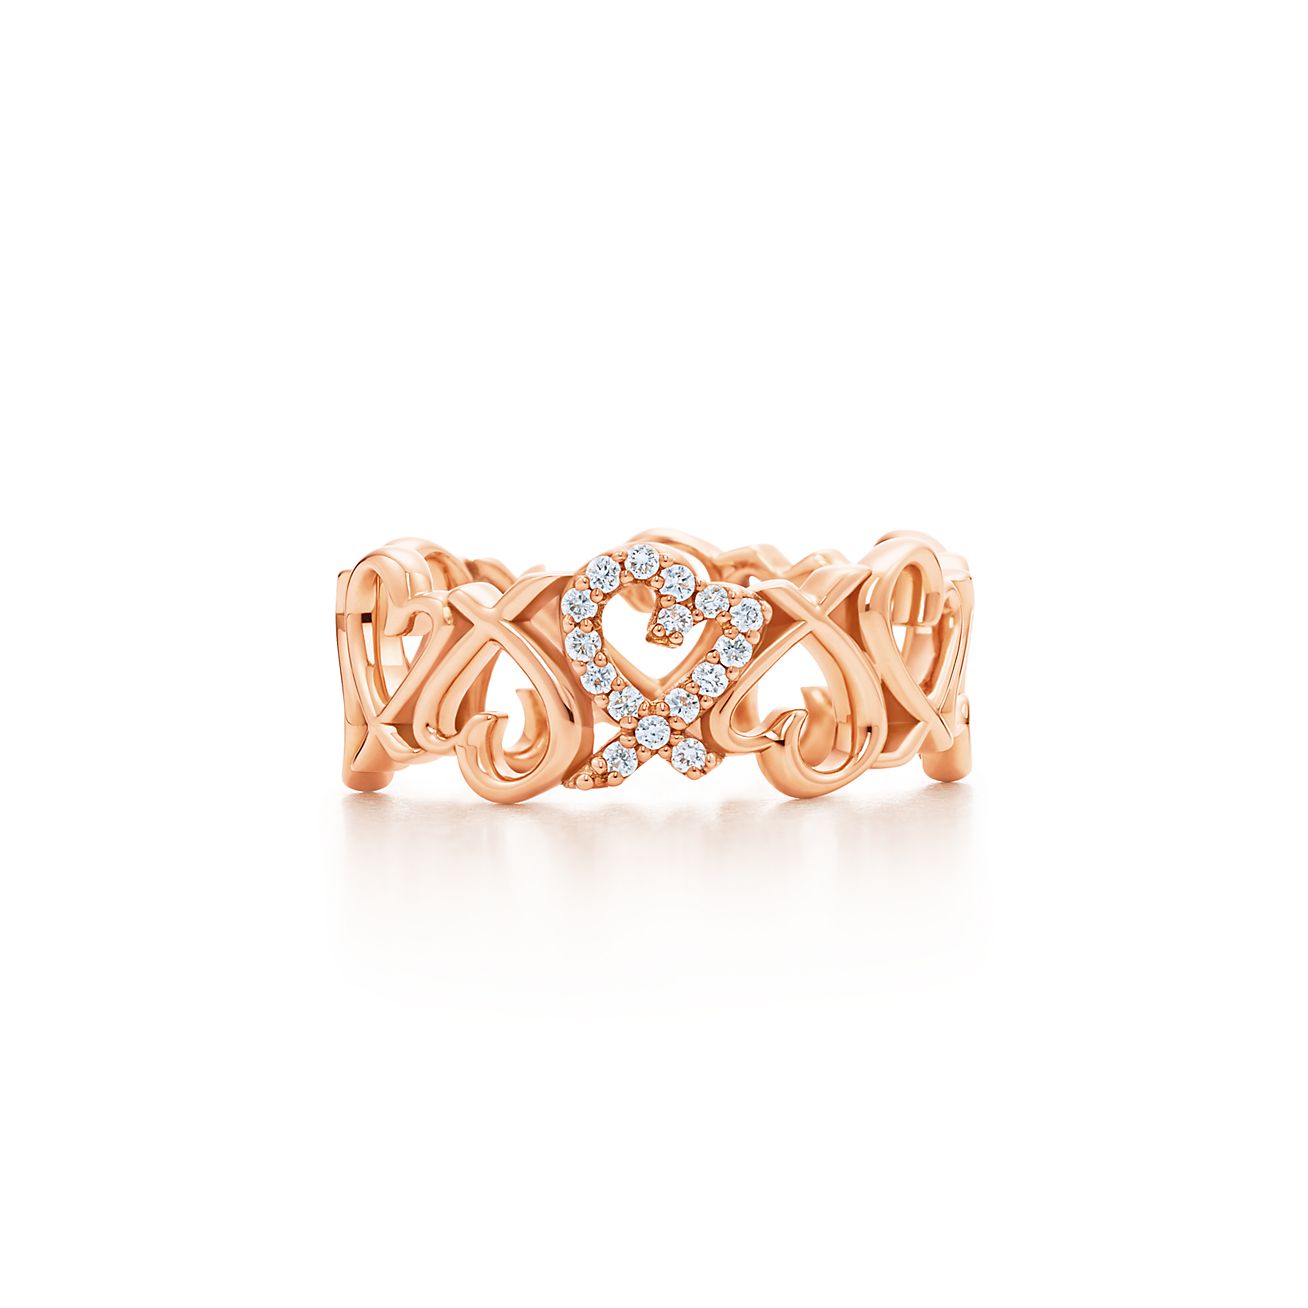 Paloma Picasso® Loving Heart band ring in 18k rose gold with diamonds. |  Tiffany & Co